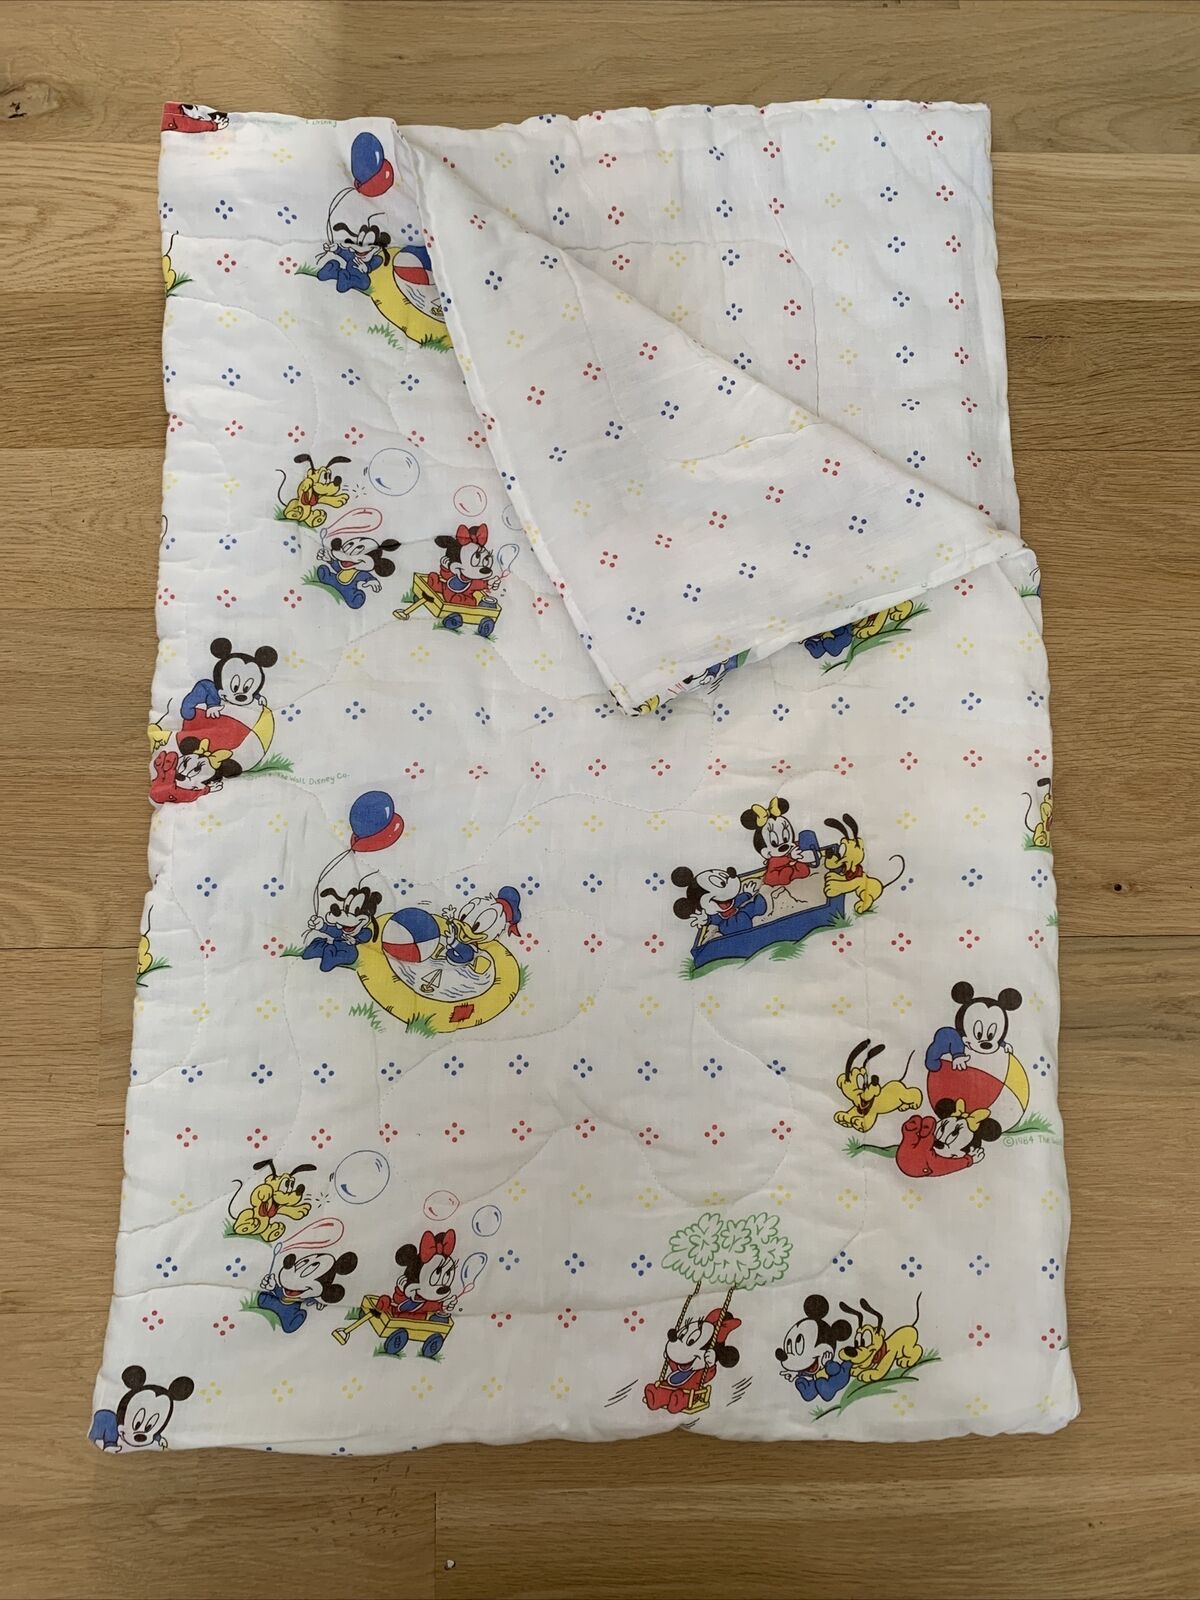 Vintage 1980’s Dundee Disney Babies Mickey Minnie Mouse Crib Quilt Sleeping Bag